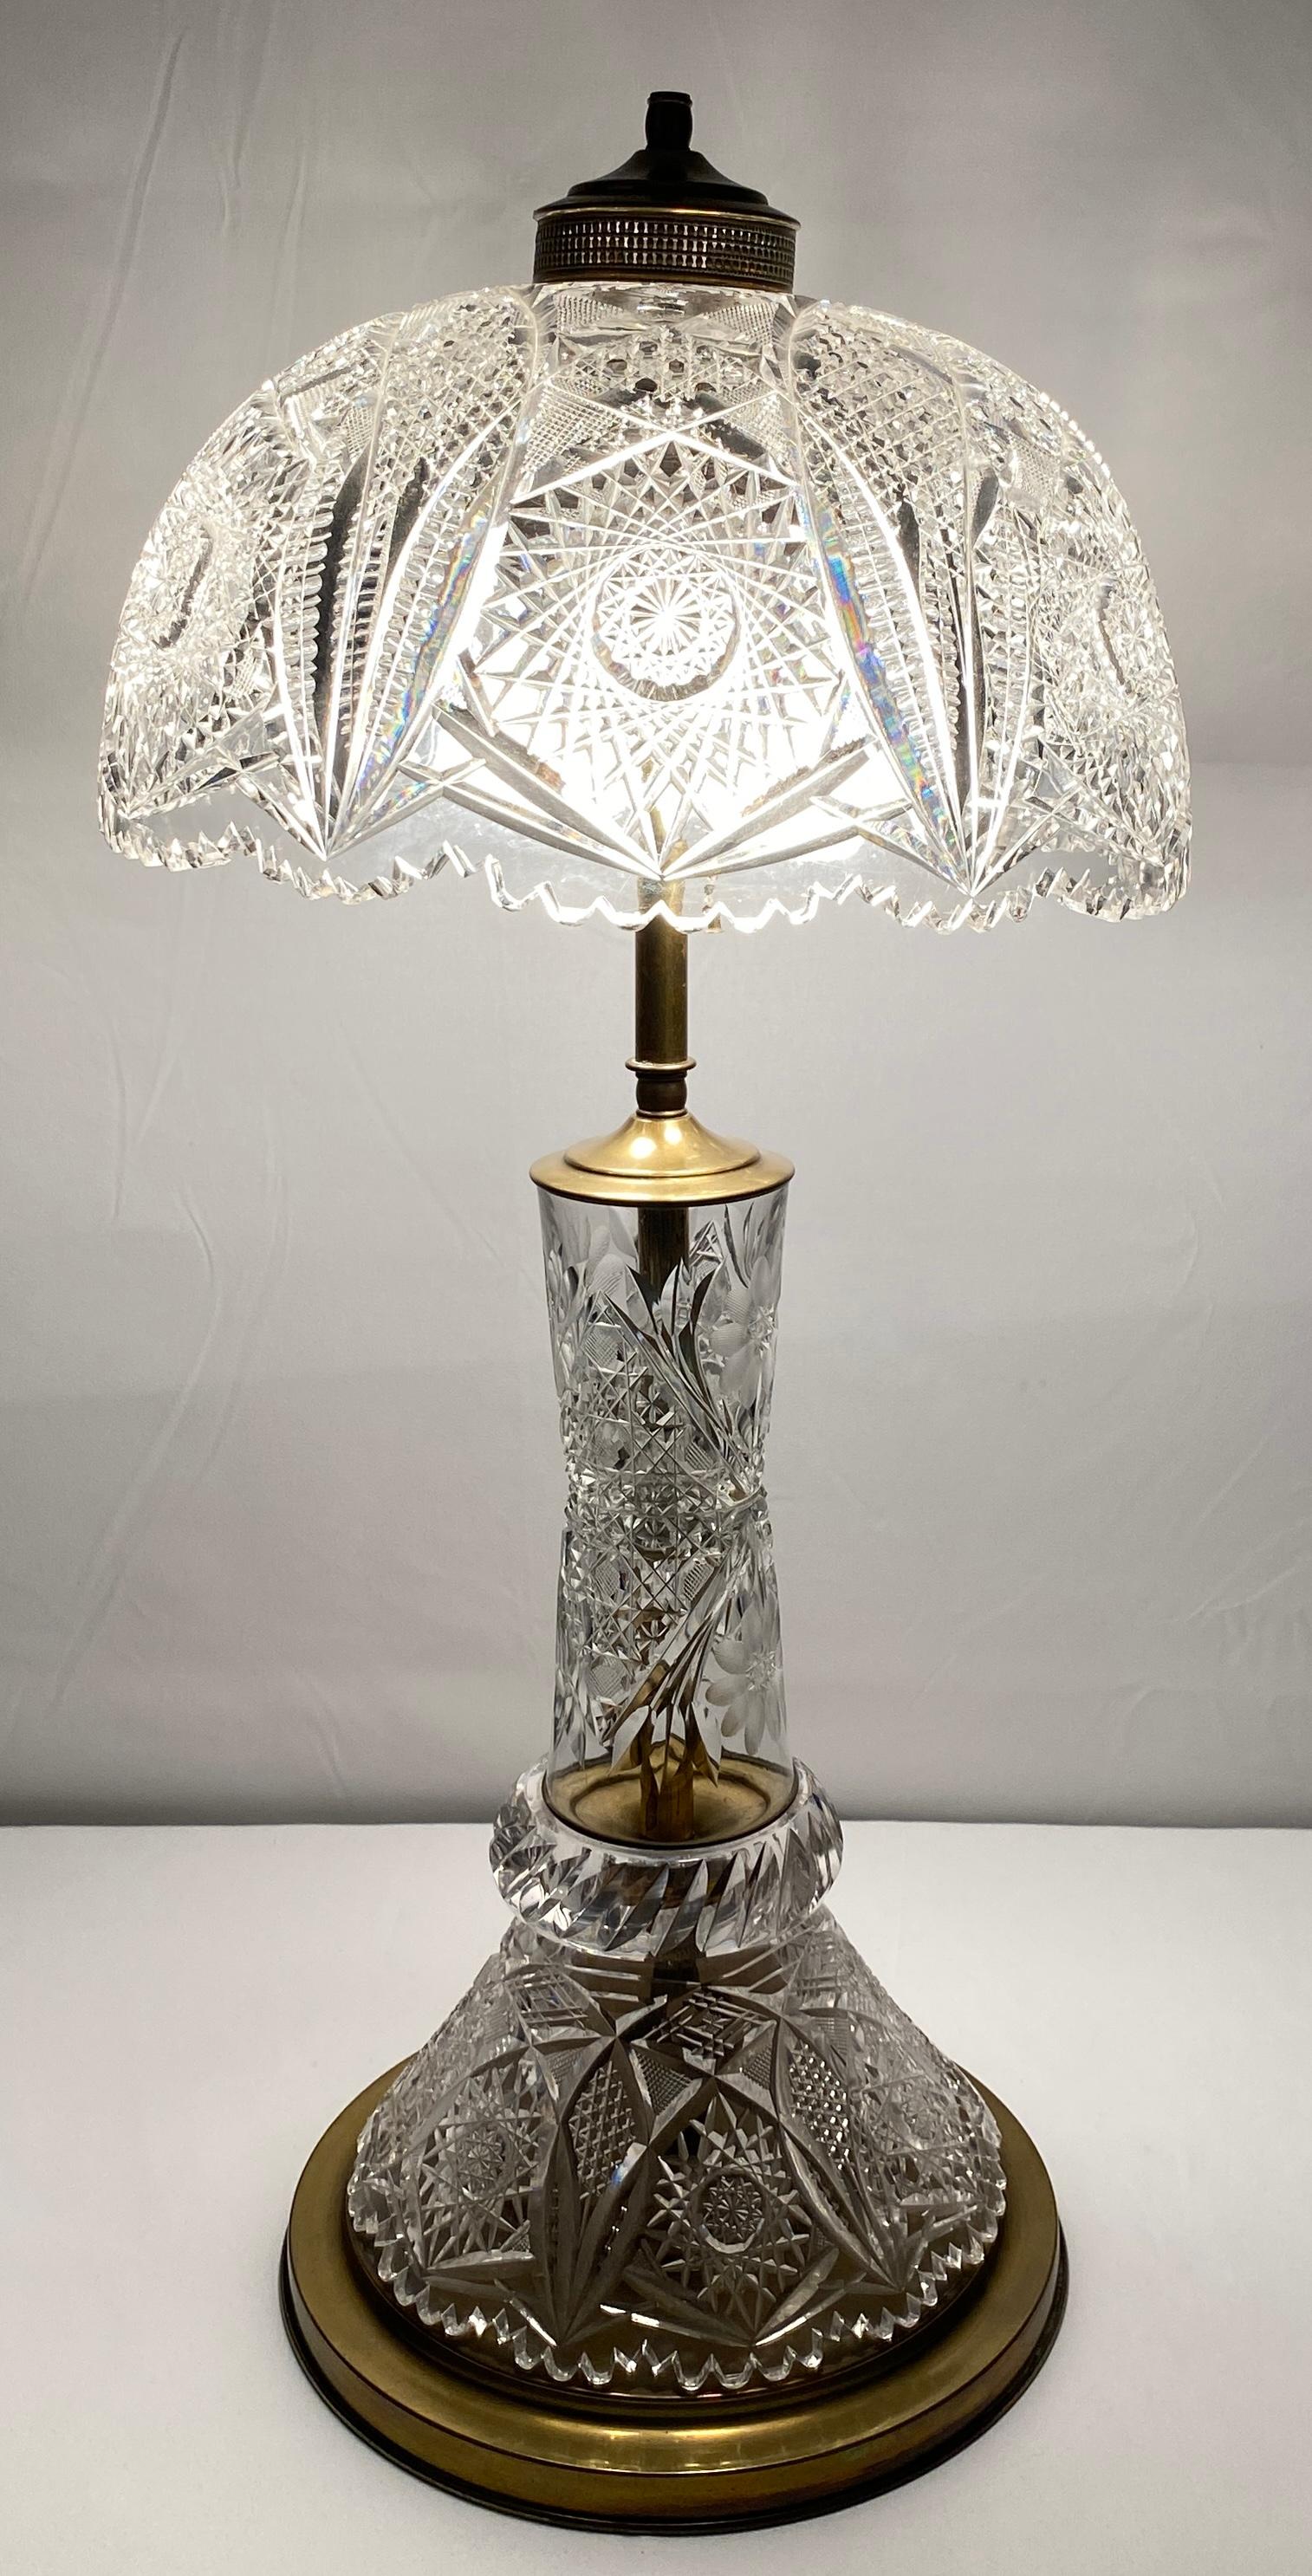 Brilliant cut crystal table lamp, the mushroom shape dome. Finely wheel cut  shade with diamond shaped patterns encircled by ring of prisms over conforming baluster formed brass base.

This fine crystal table lamp in the Victorian style has some